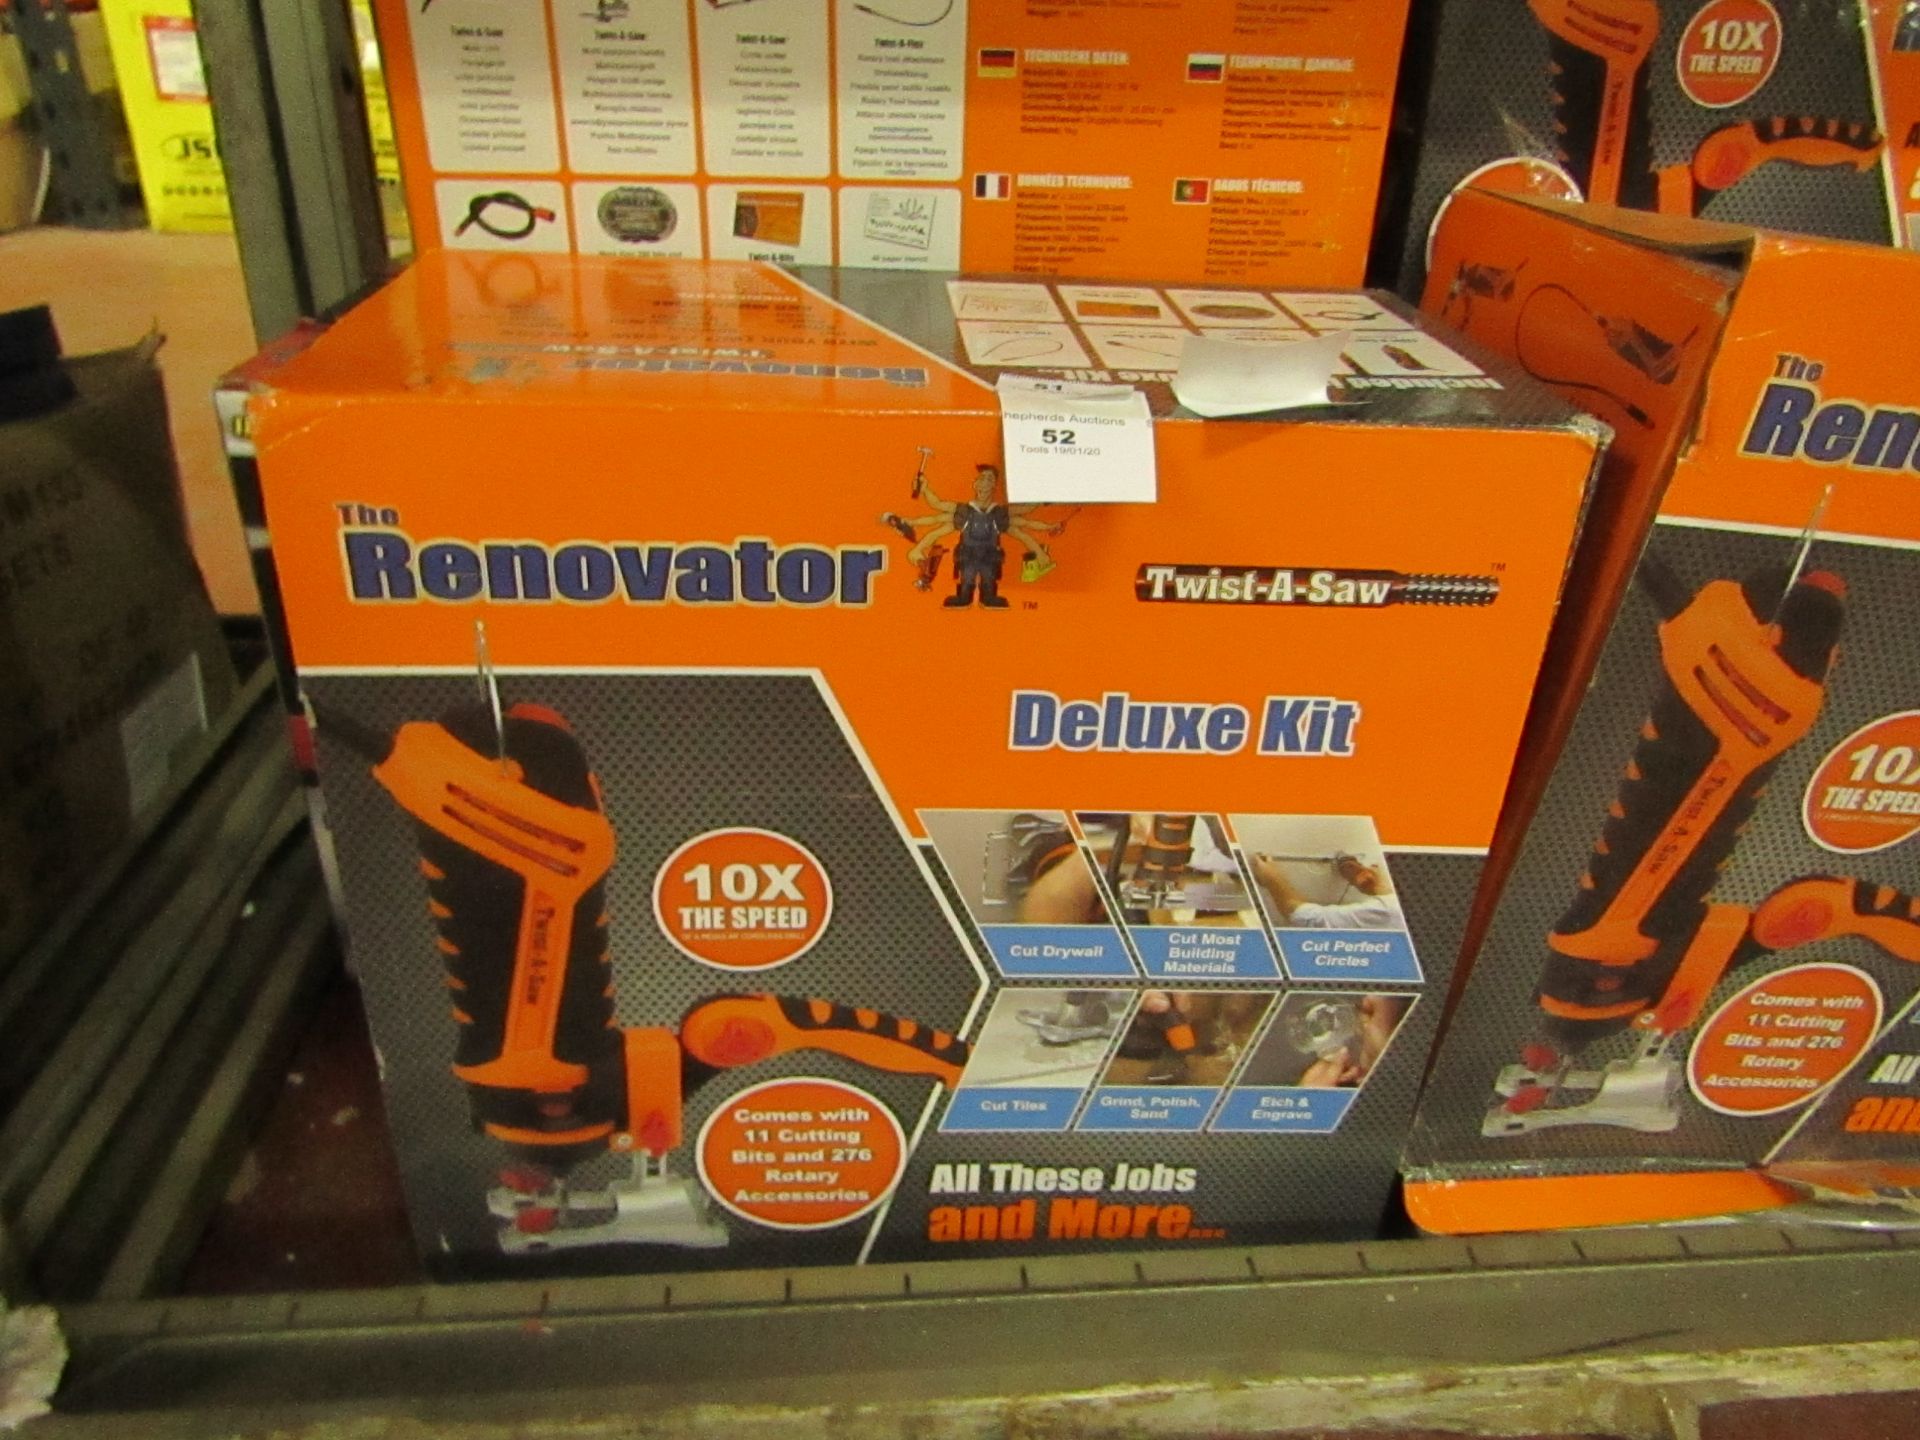 | 1x | The Renovator Twist-a-Saw Deluxe Kit | Tested working and boxed (we havent checked all